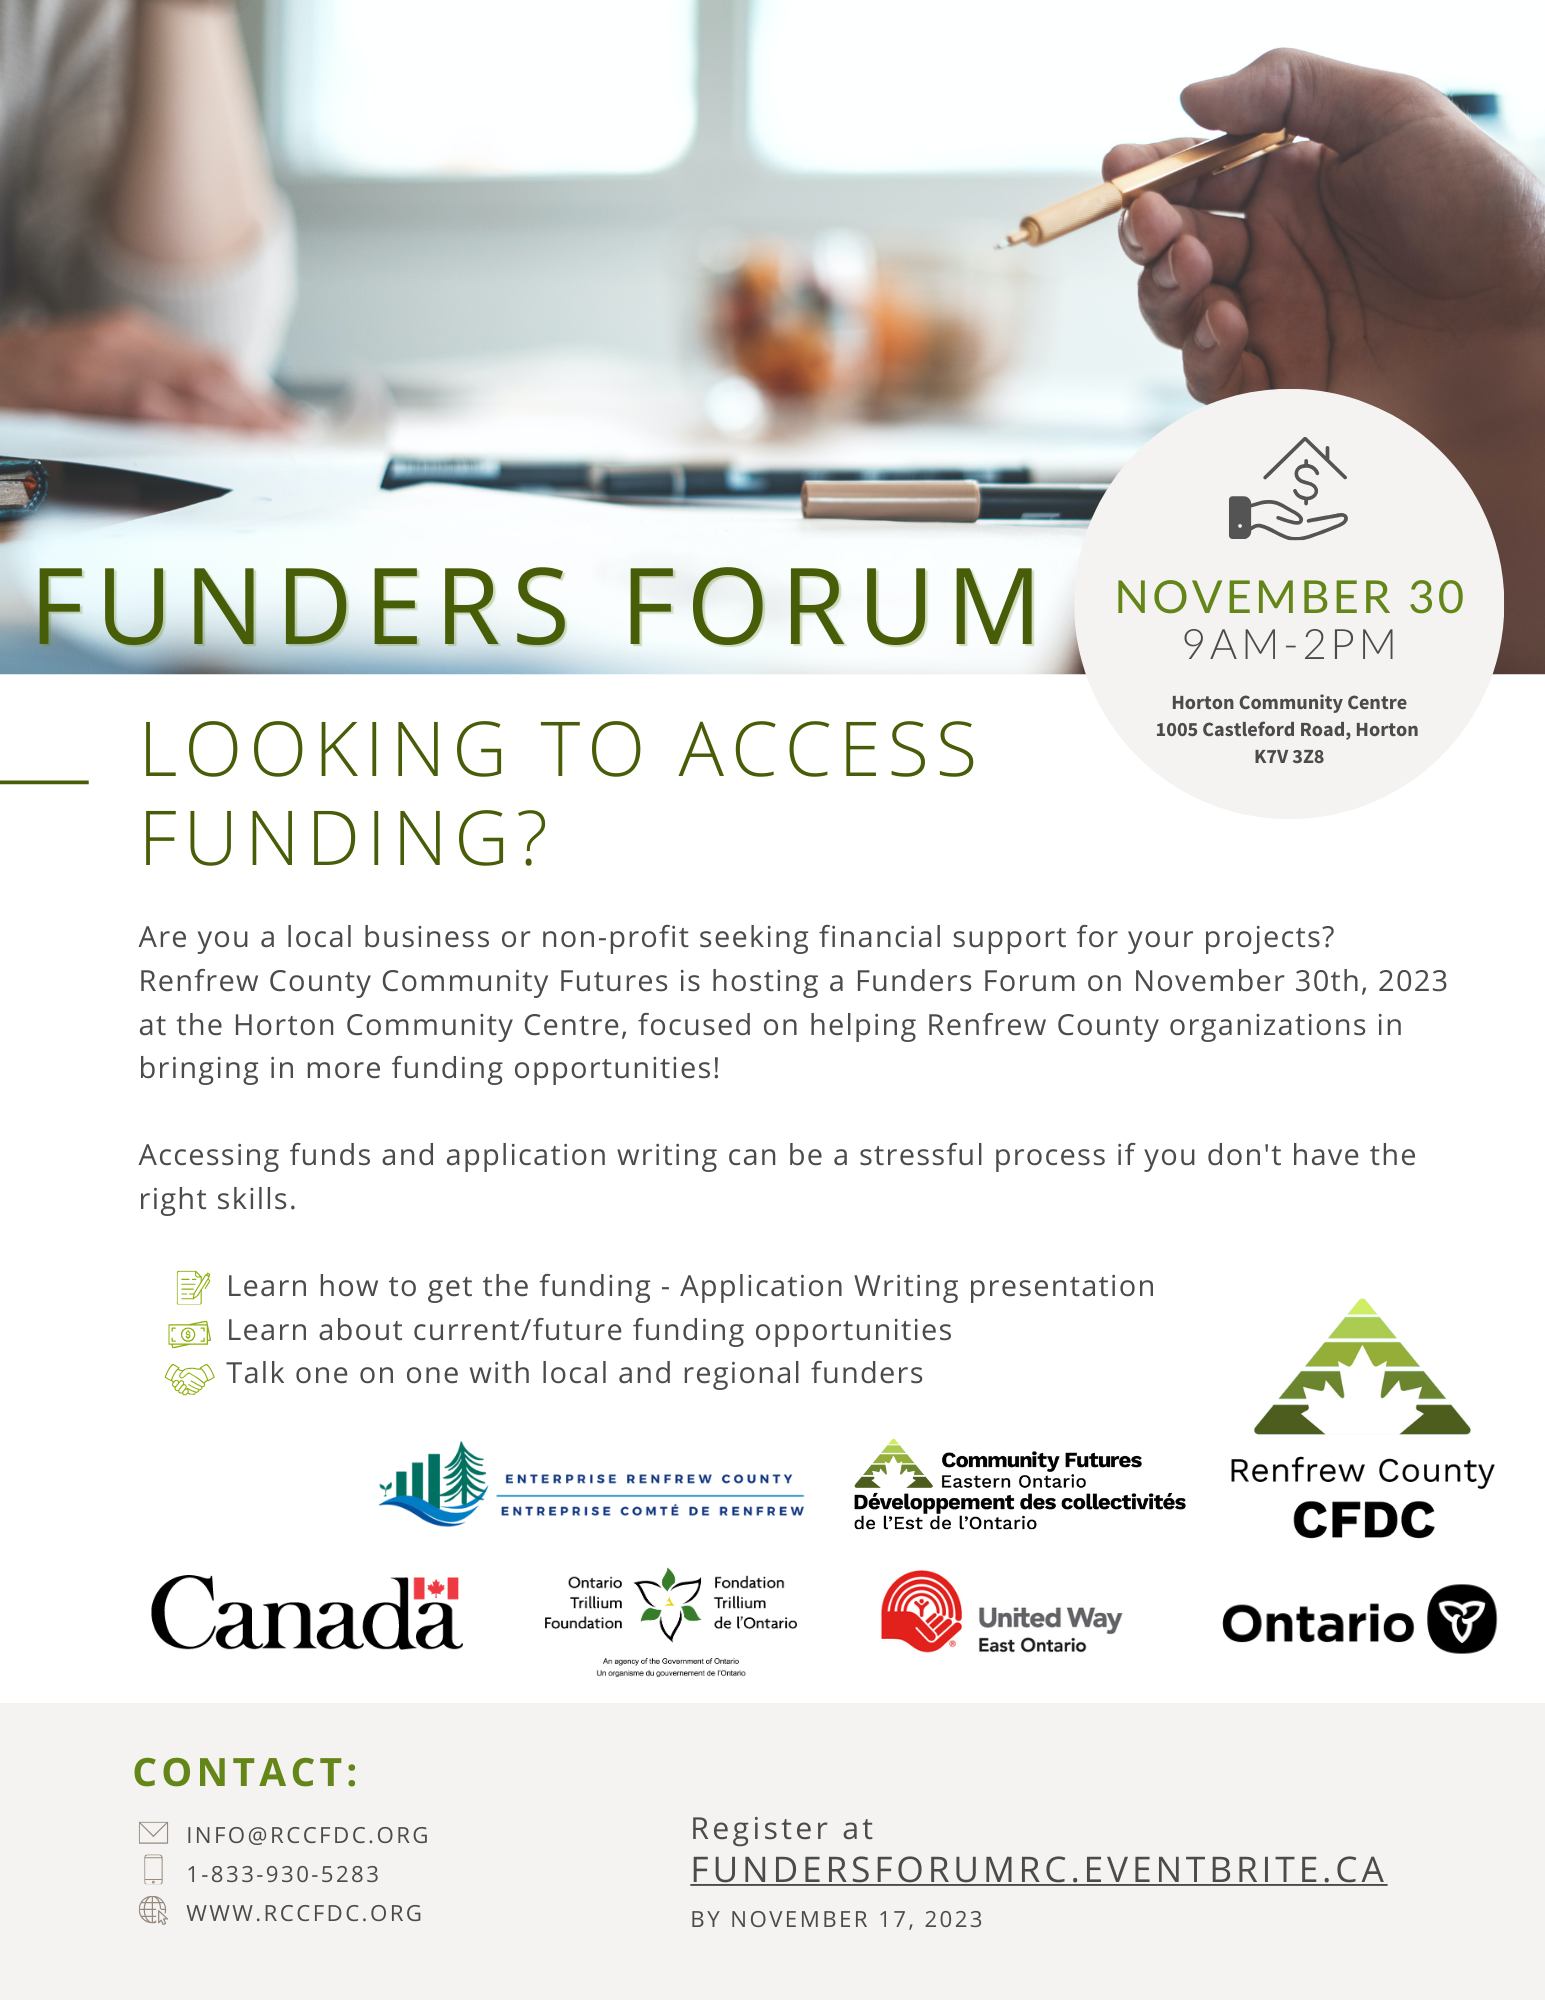 Poster with text about the Funders Forum event including logos from partnership organizations.